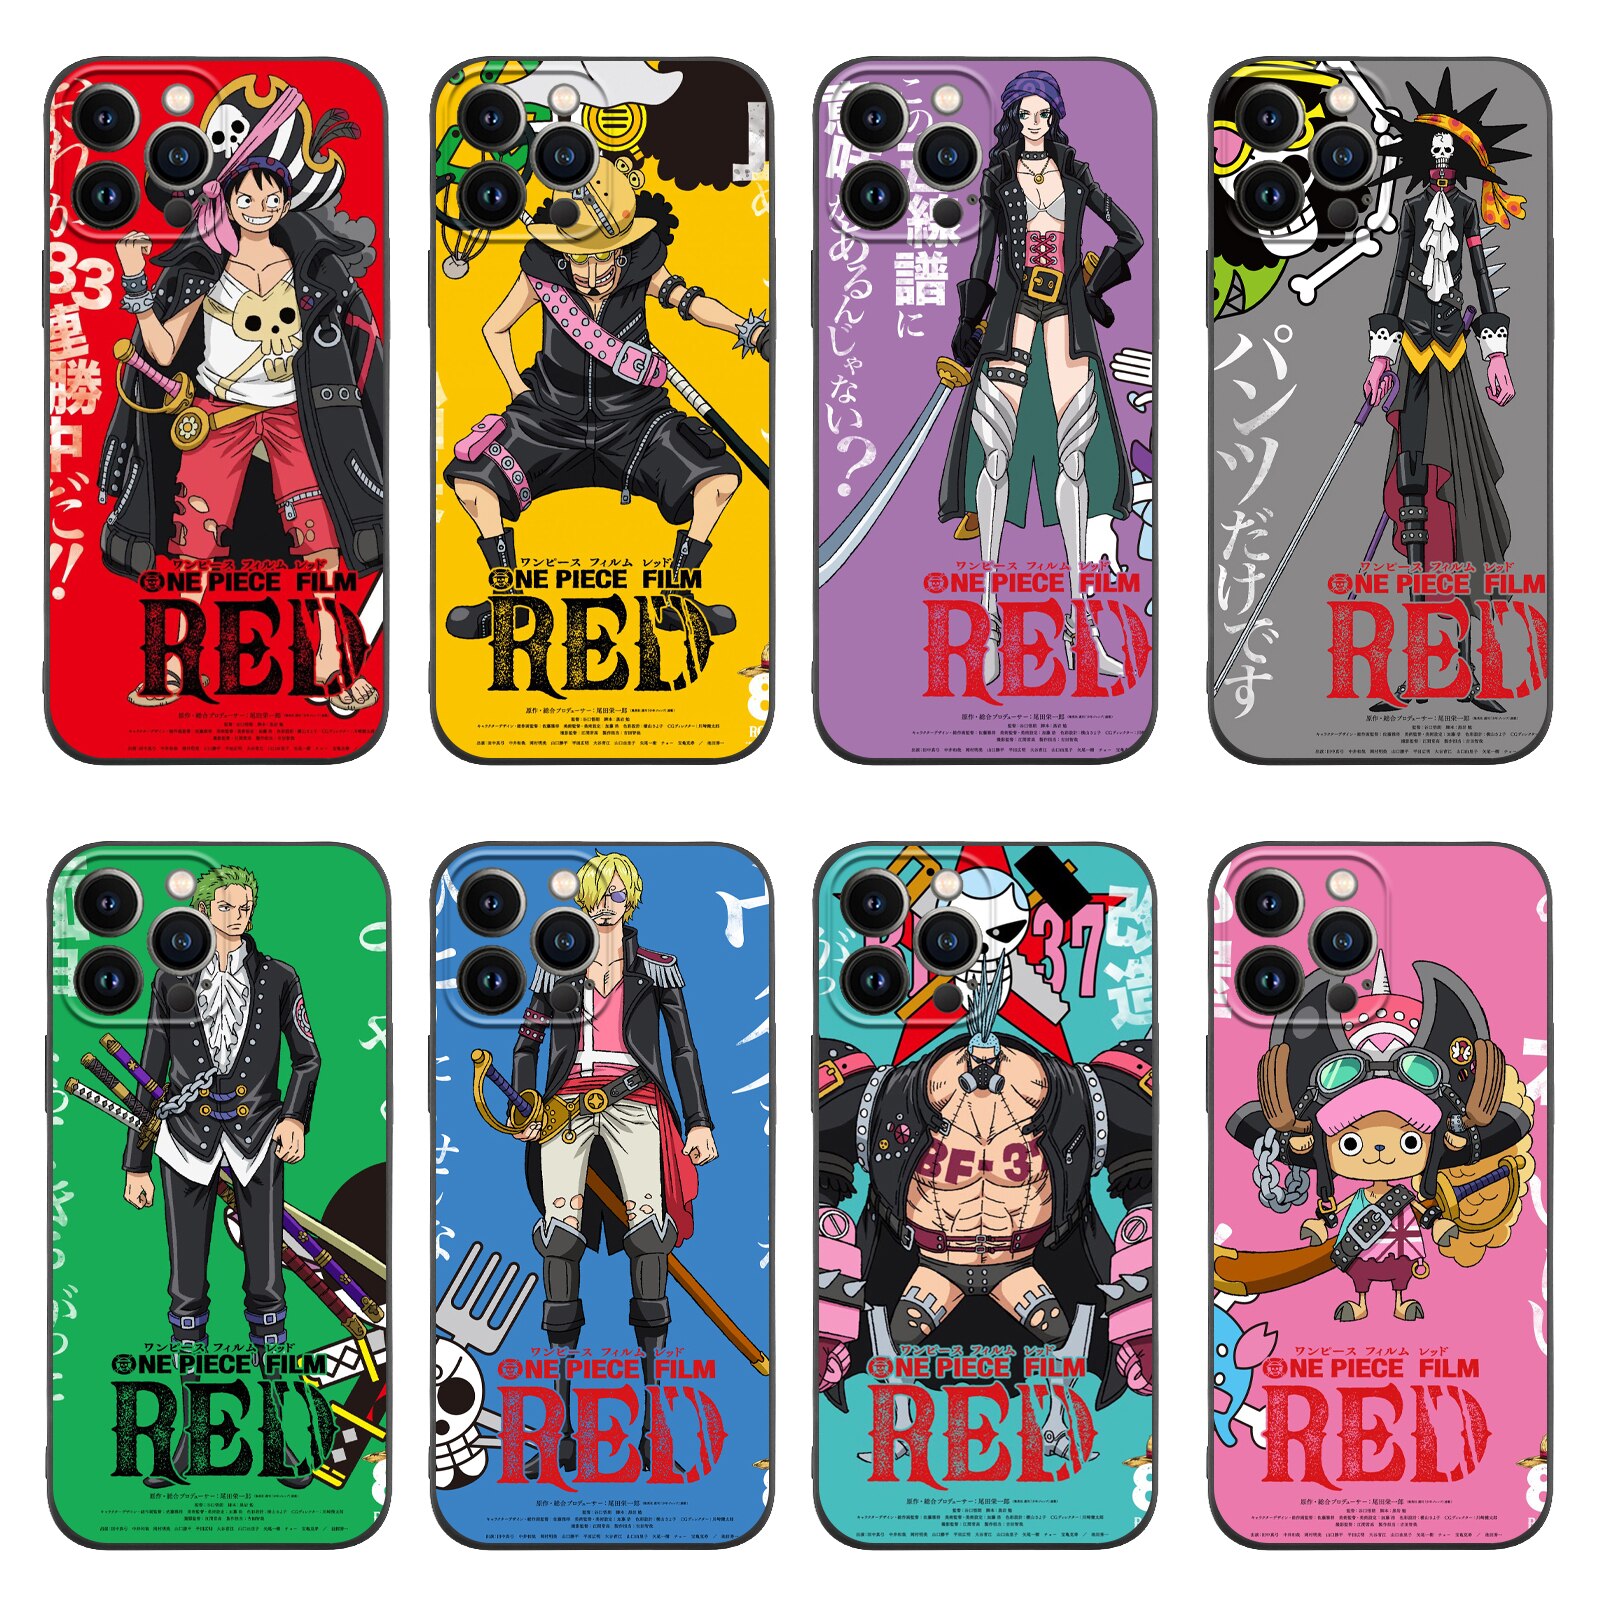 One Piece Film: Red Soft Phone Case for iPhone